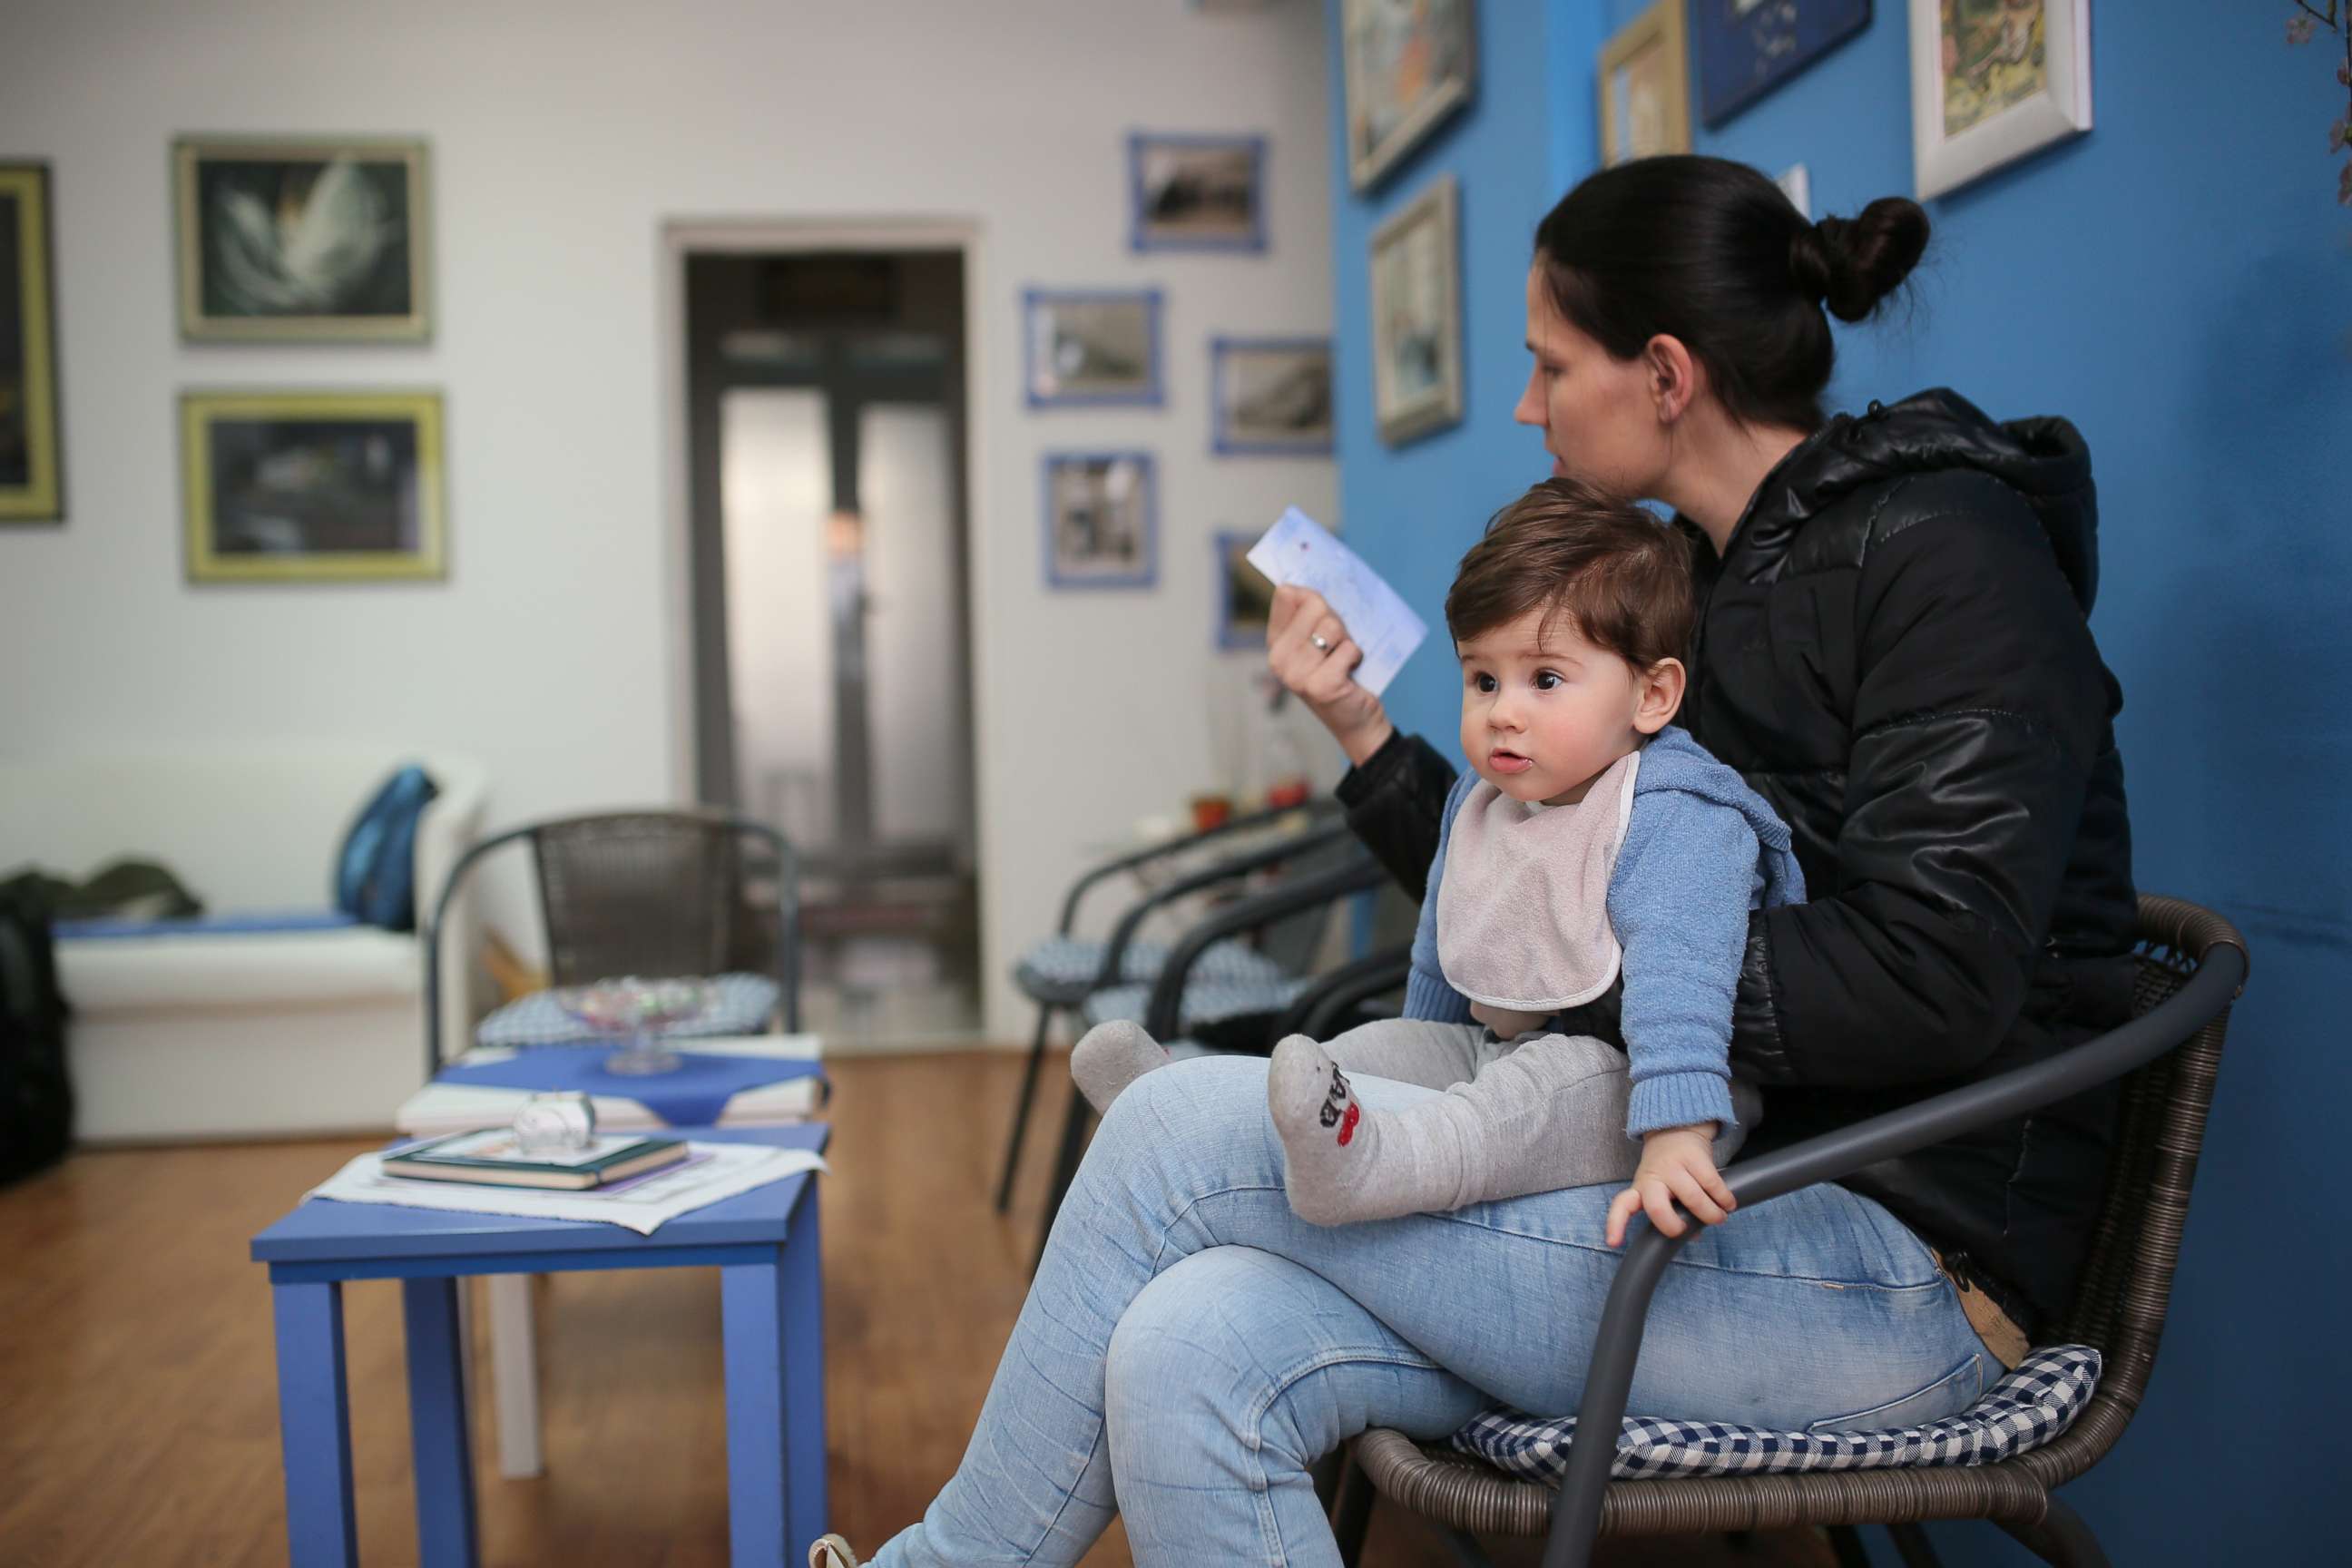 PHOTO: A woman and her son sit in a doctor's office in this undated stock photo.